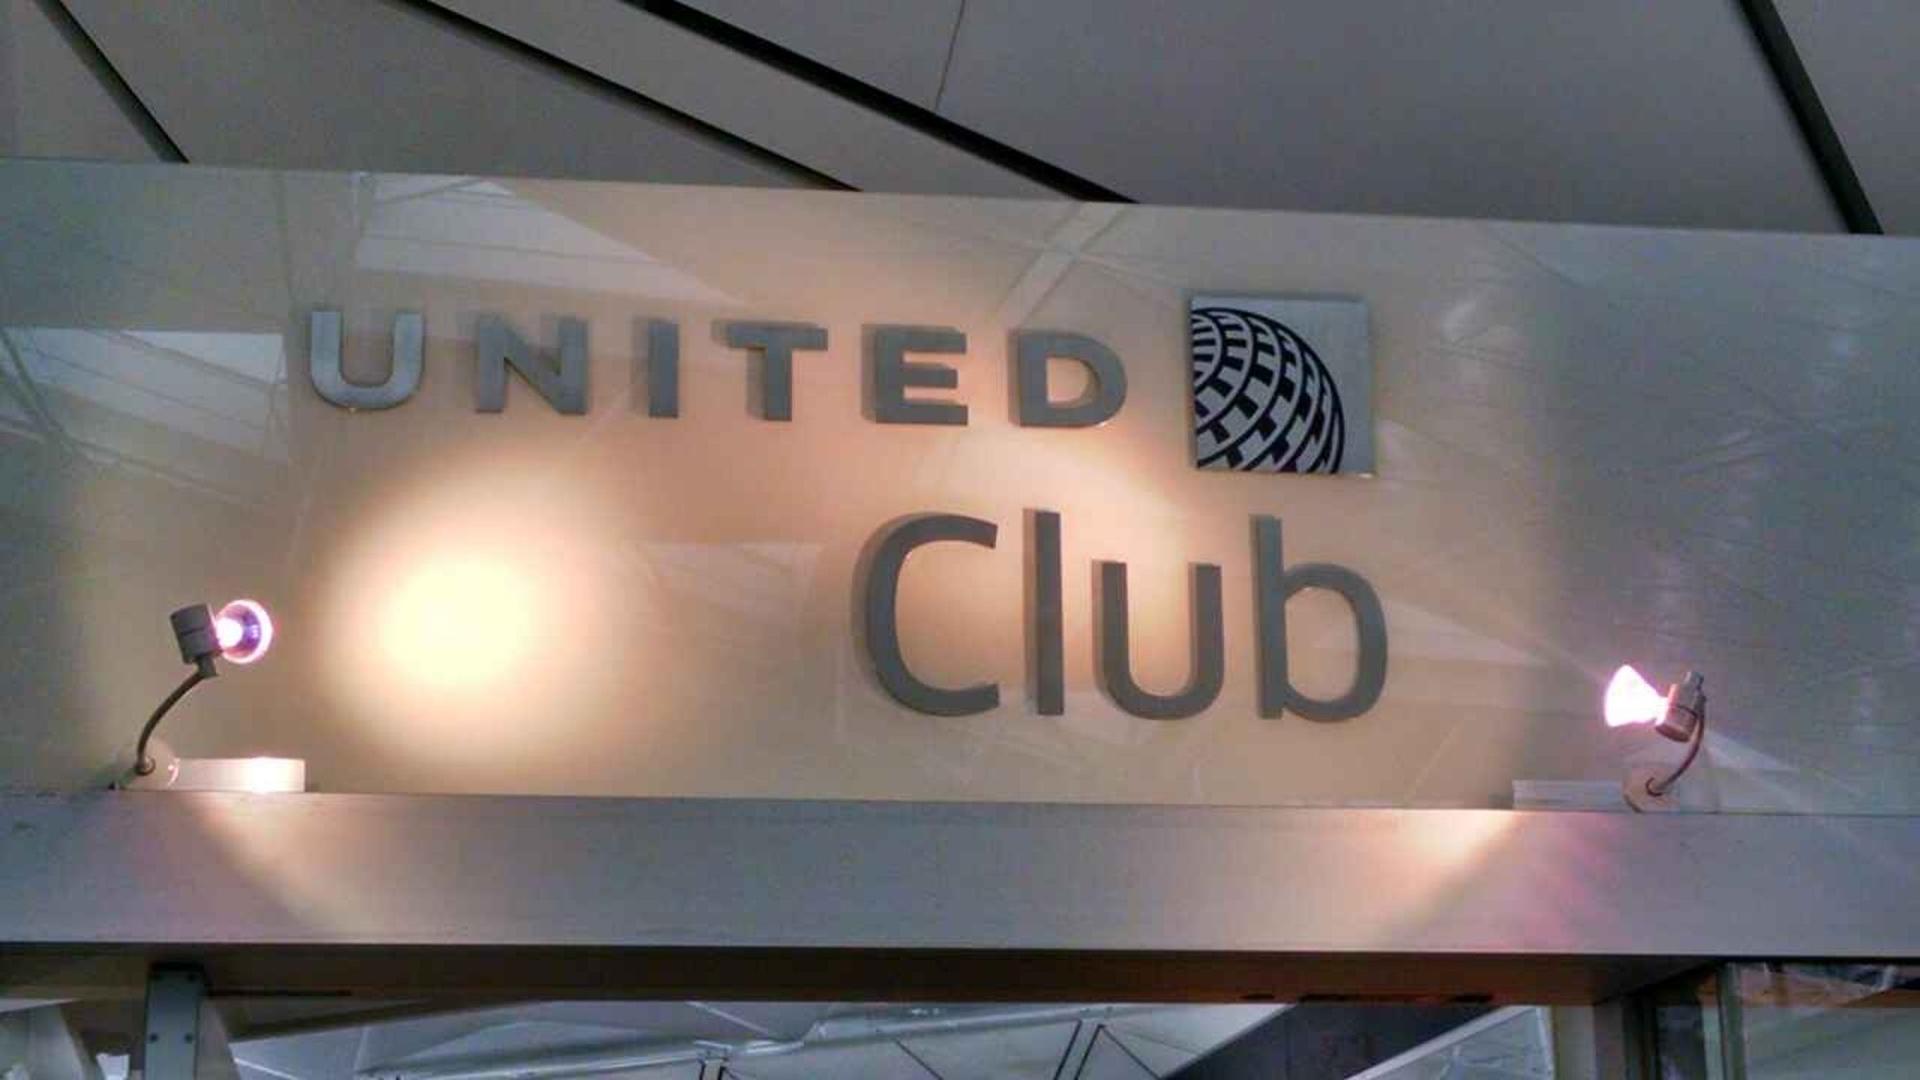 United Airlines United Club  image 11 of 28